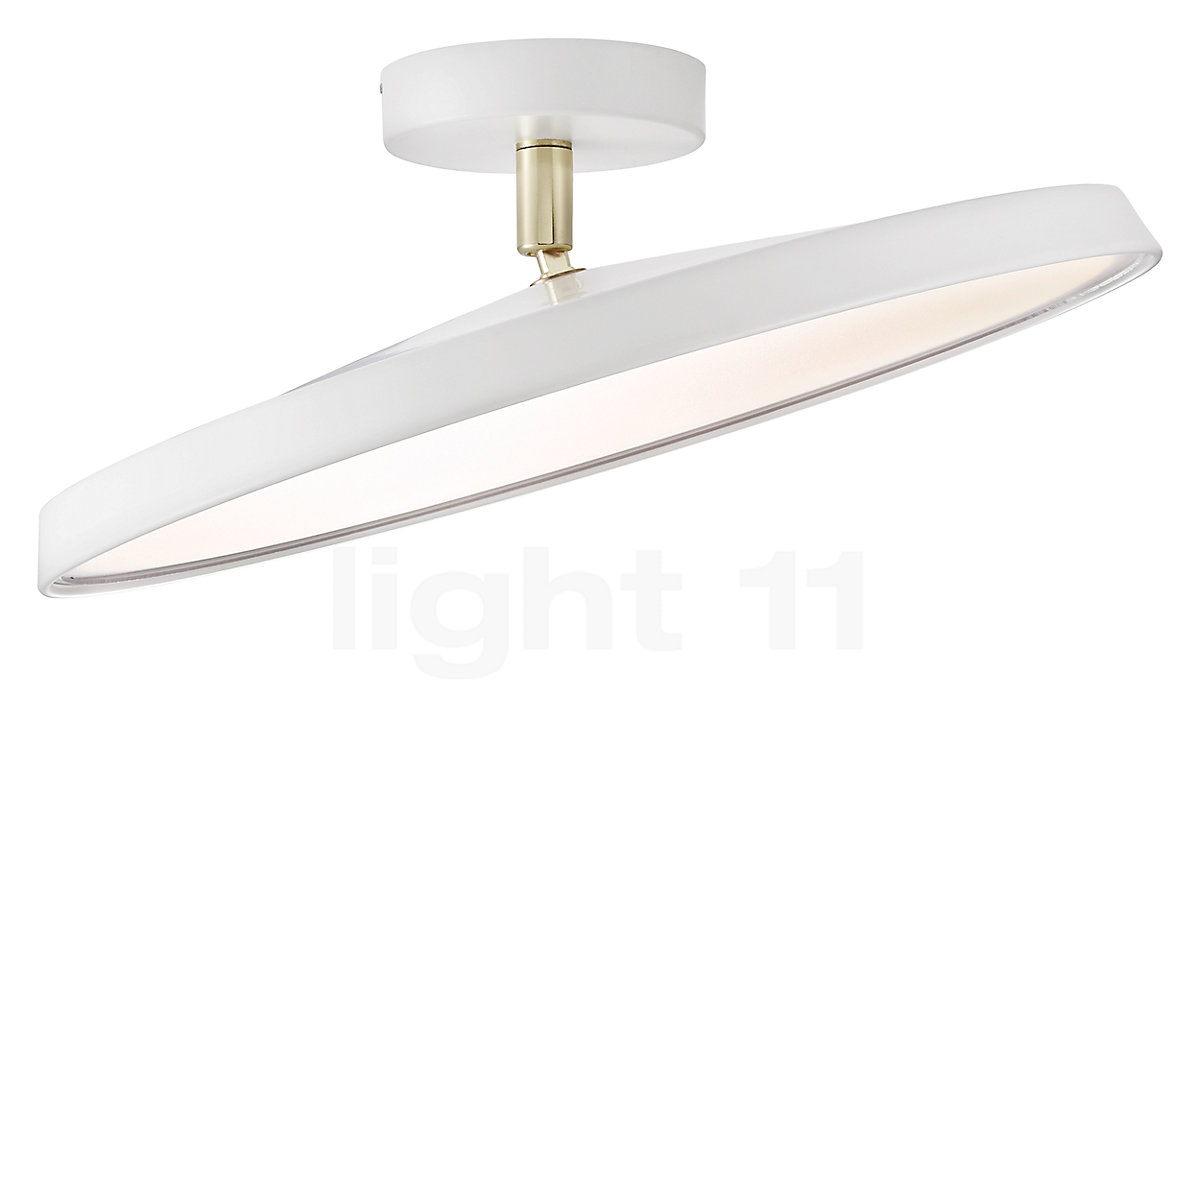 Buy Design for the People Kaito Pro Ceiling Light LED at